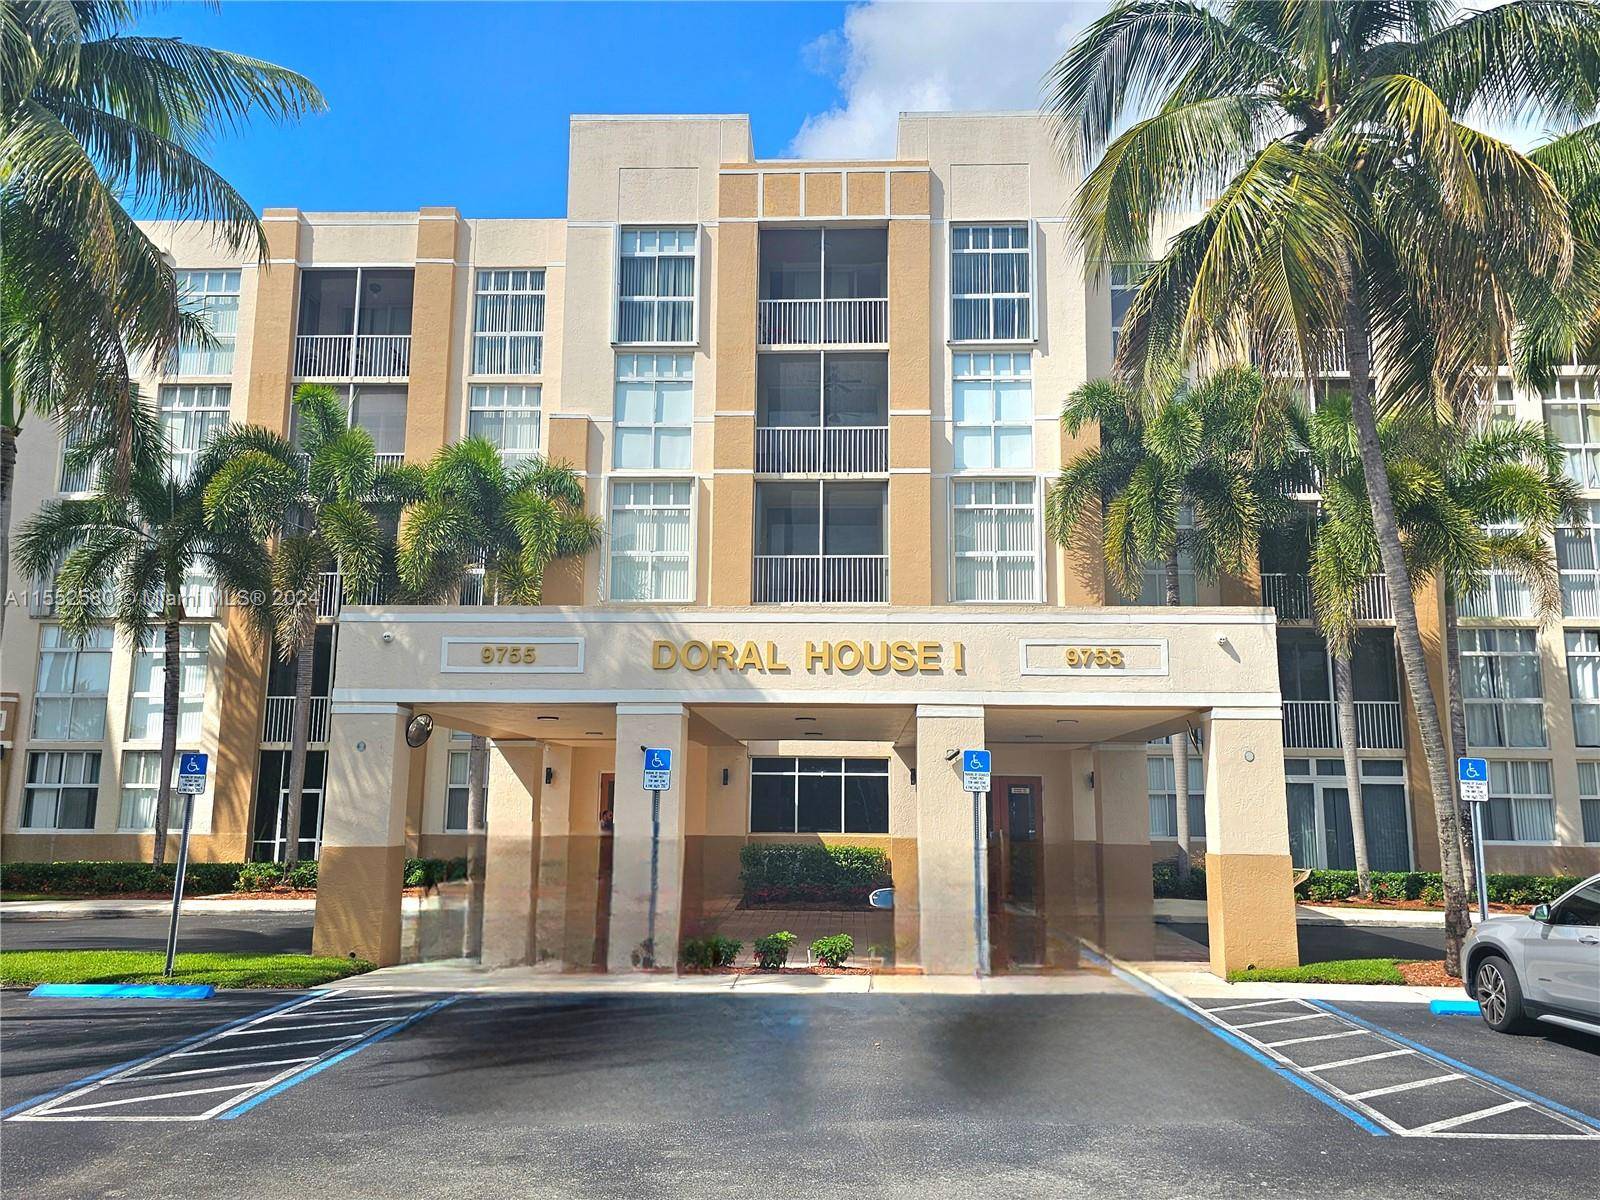 Beautiful 2 2 apartment in Doral with kitchen Marble top and wood like tile floors, most appliances like new, Washer and Dryer inside the unit.